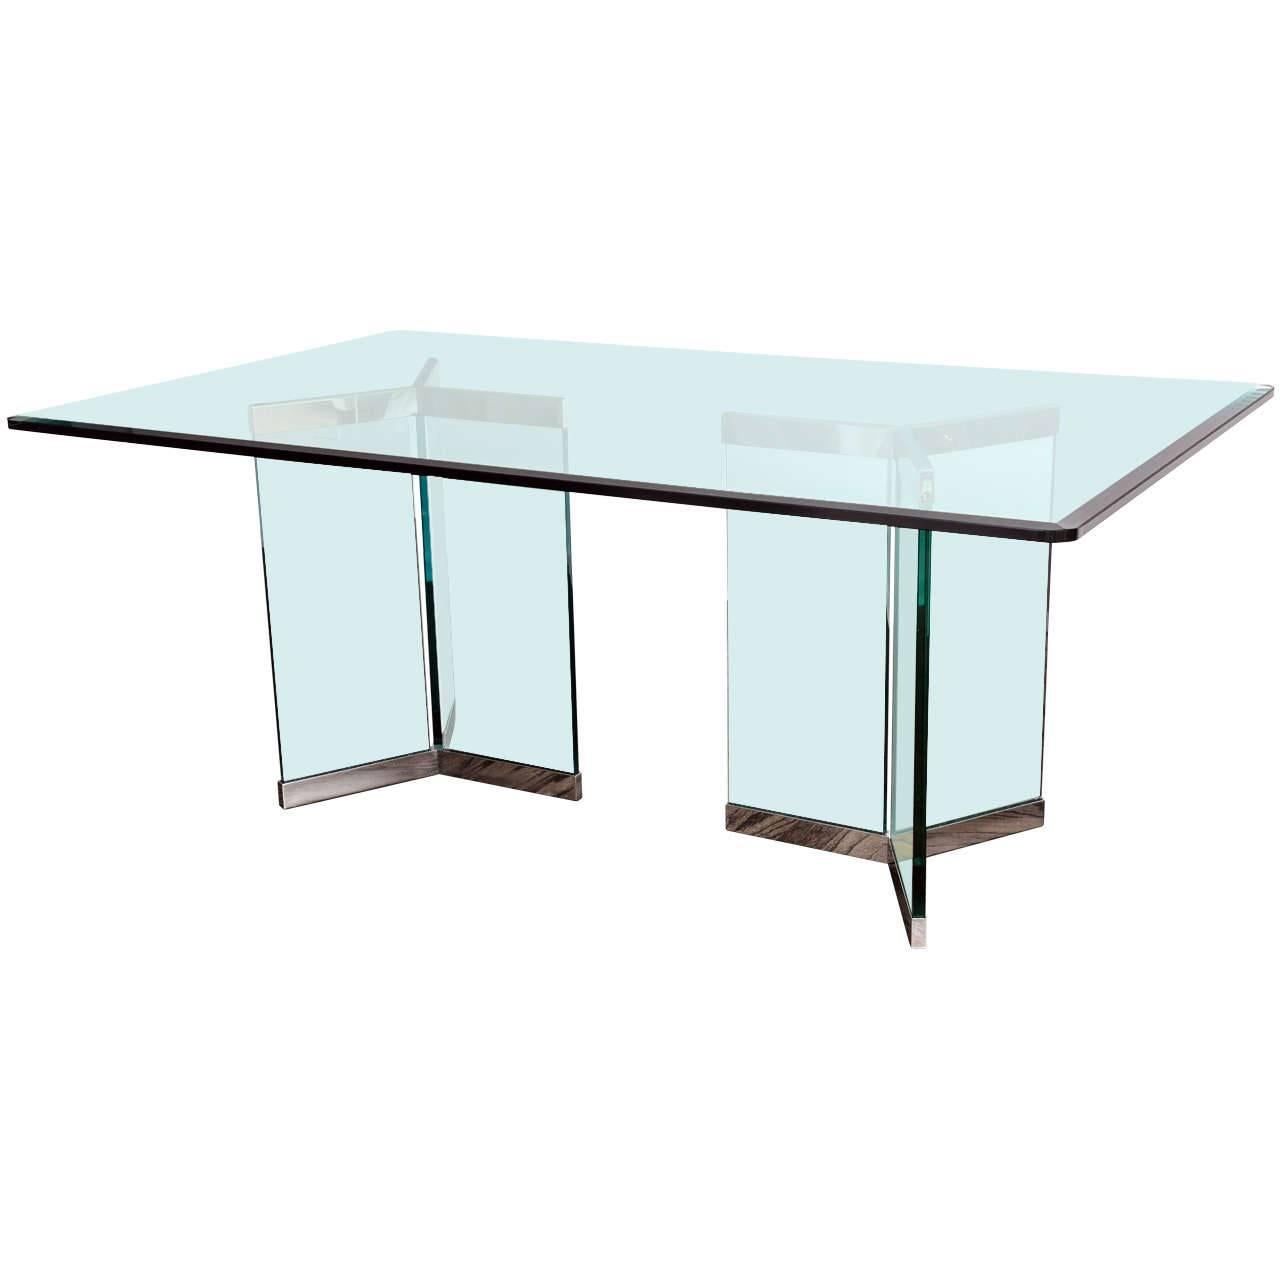 Leon Rosen, Pace Collection Rectangular Polished Chrome and Glass Dining Table